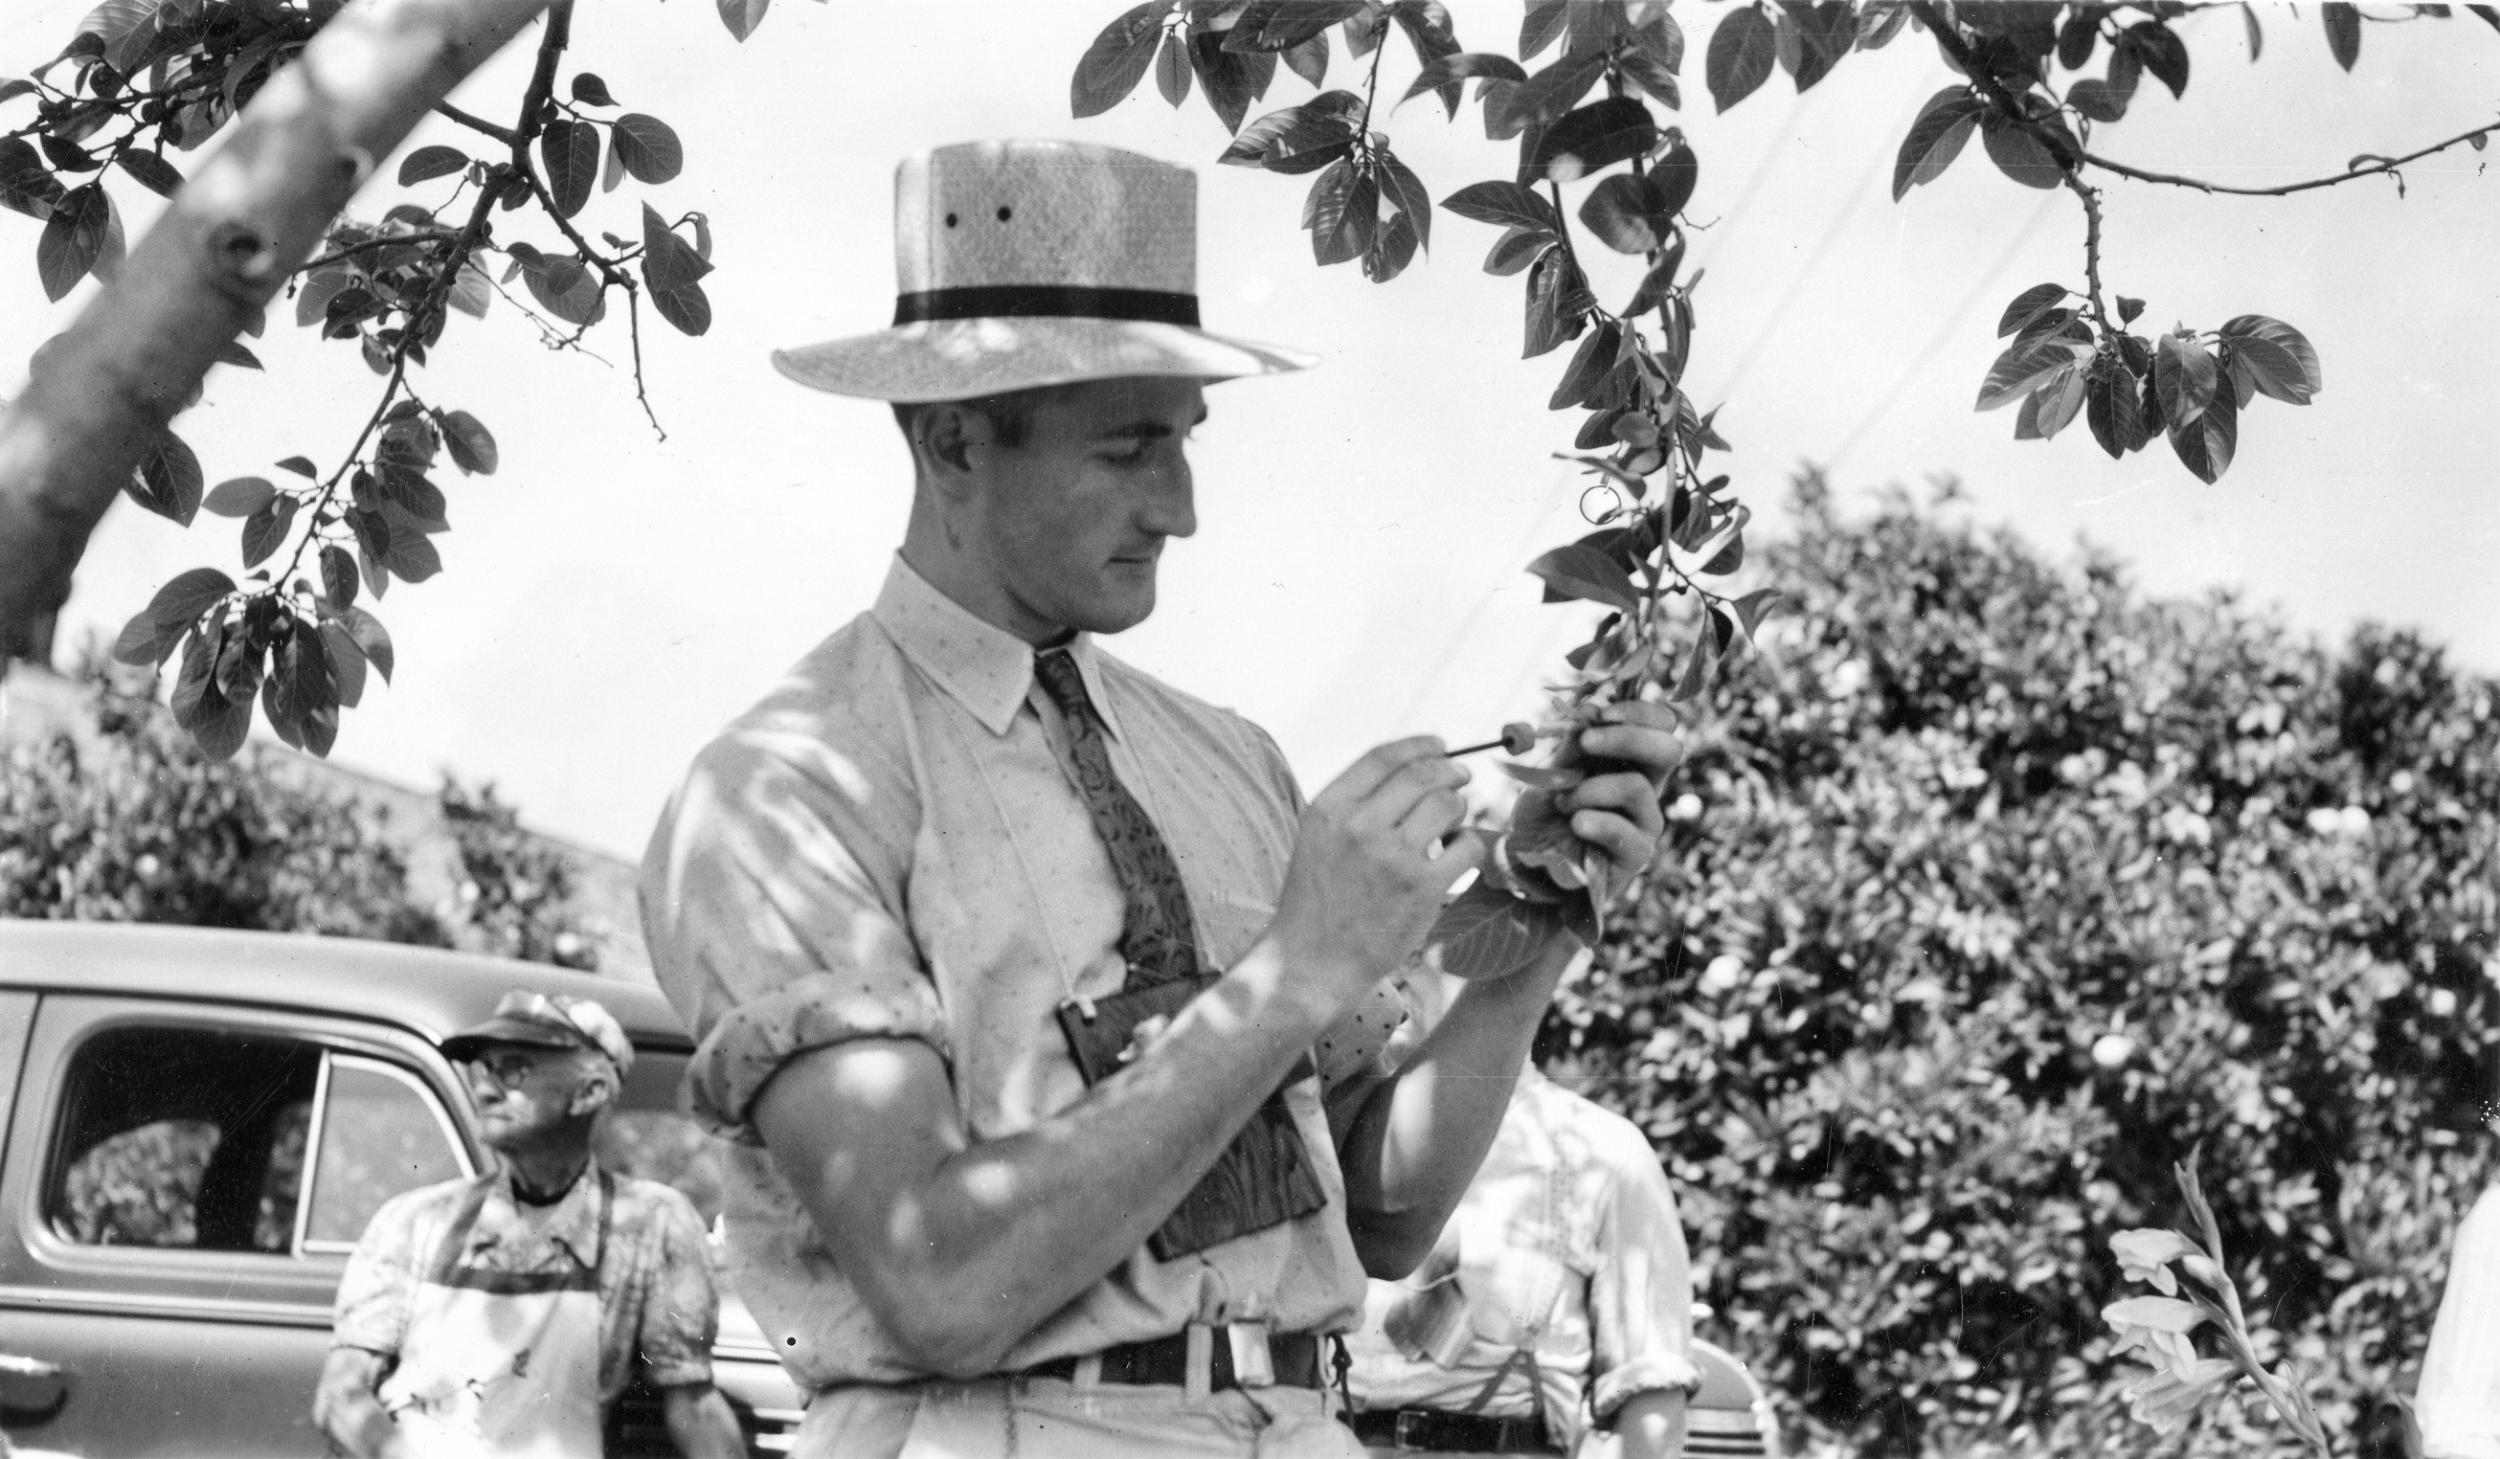 A man pollinates a flower by hand in California in 1941. Farmers in some parts of the world have resorted to this method due to the decline of local bees.